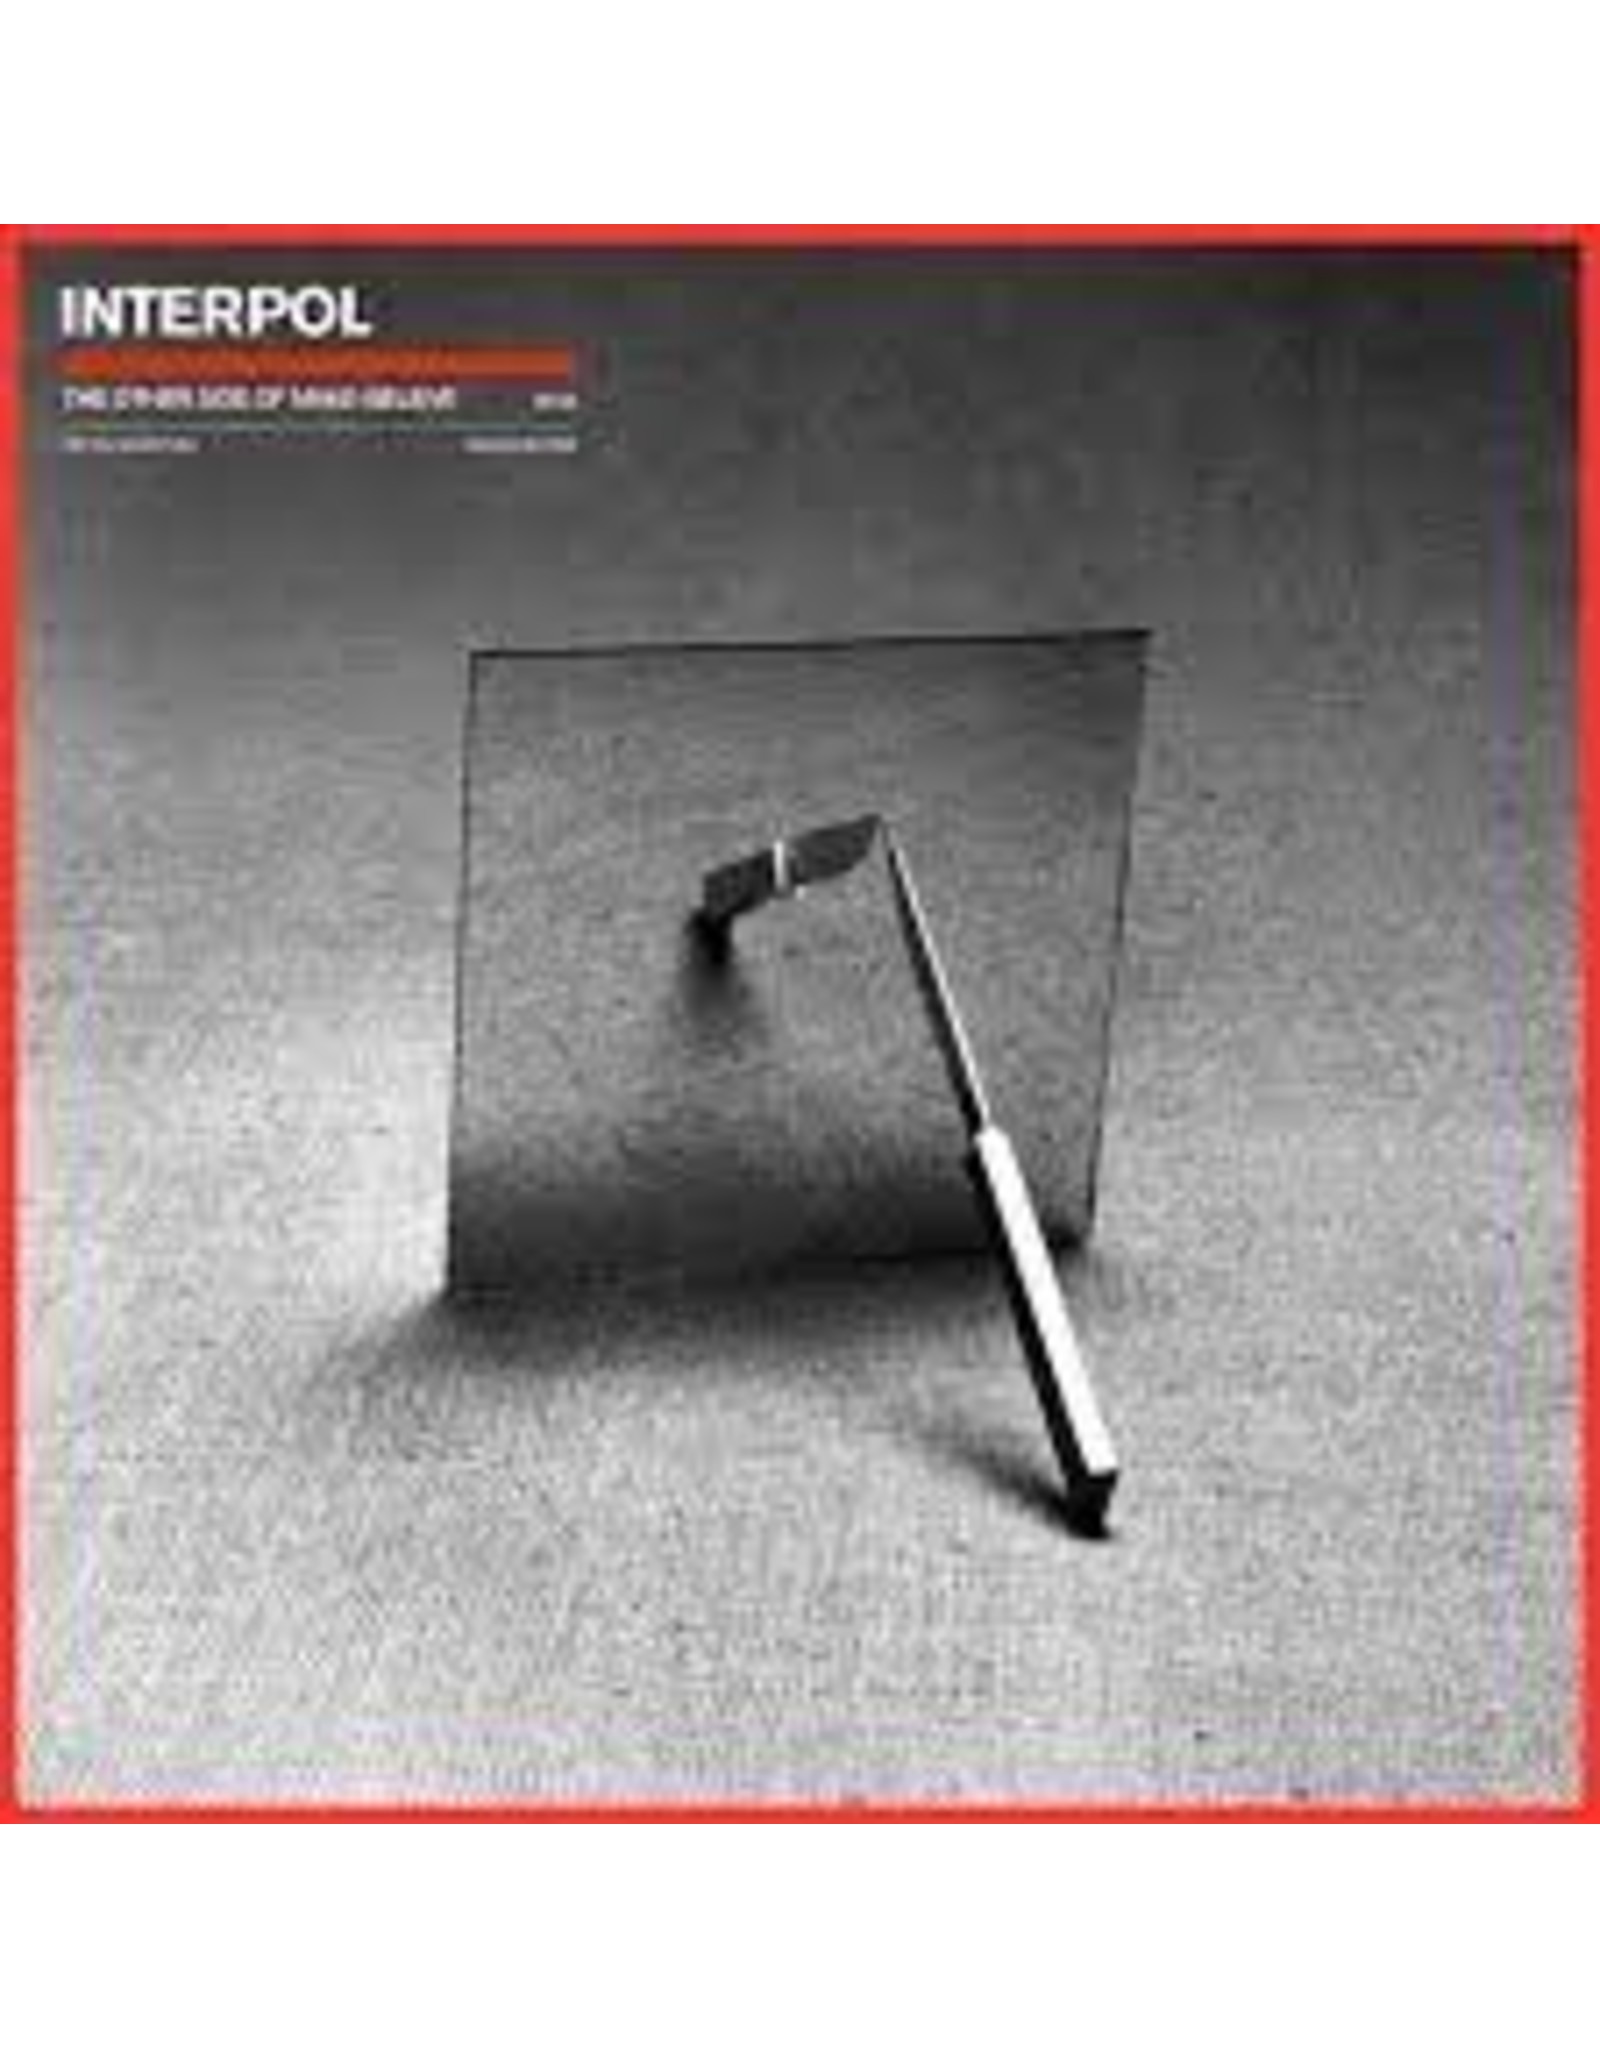 Interpol - The Other Side Of Make-Believe RED LP